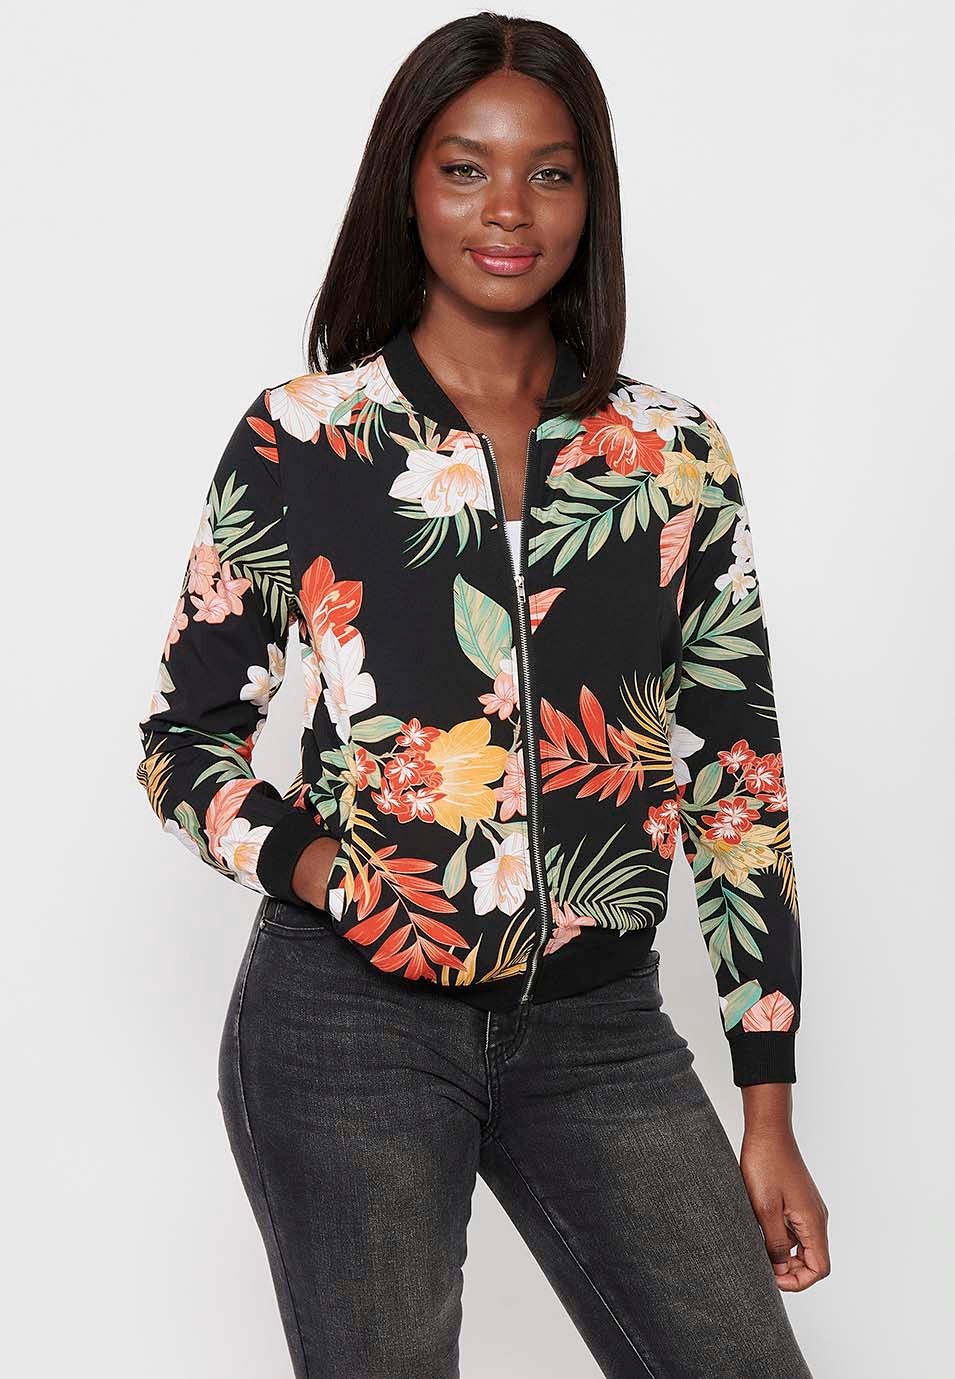 Long-sleeved sweatshirt jacket with ribbed finishes and floral print with front zipper closure in Multicolor for Women